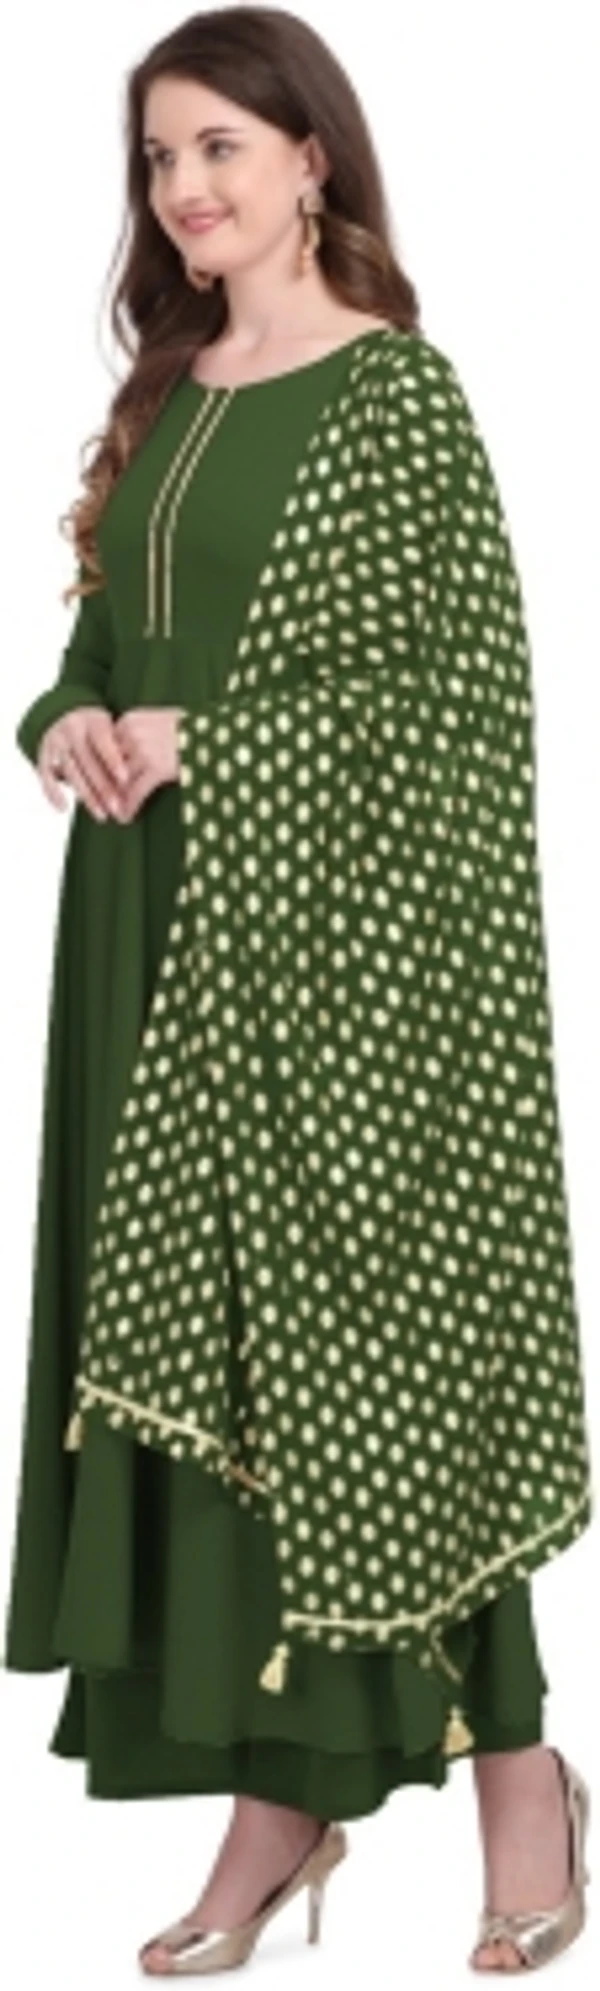 THE FAB FACTORY Women Kurta and Dupatta SetGeorgette, Crepe FabricFull SleeveSolid PatternColor: Green, GoldFor Women10 Days Return Policy, No questions asked. - XXl